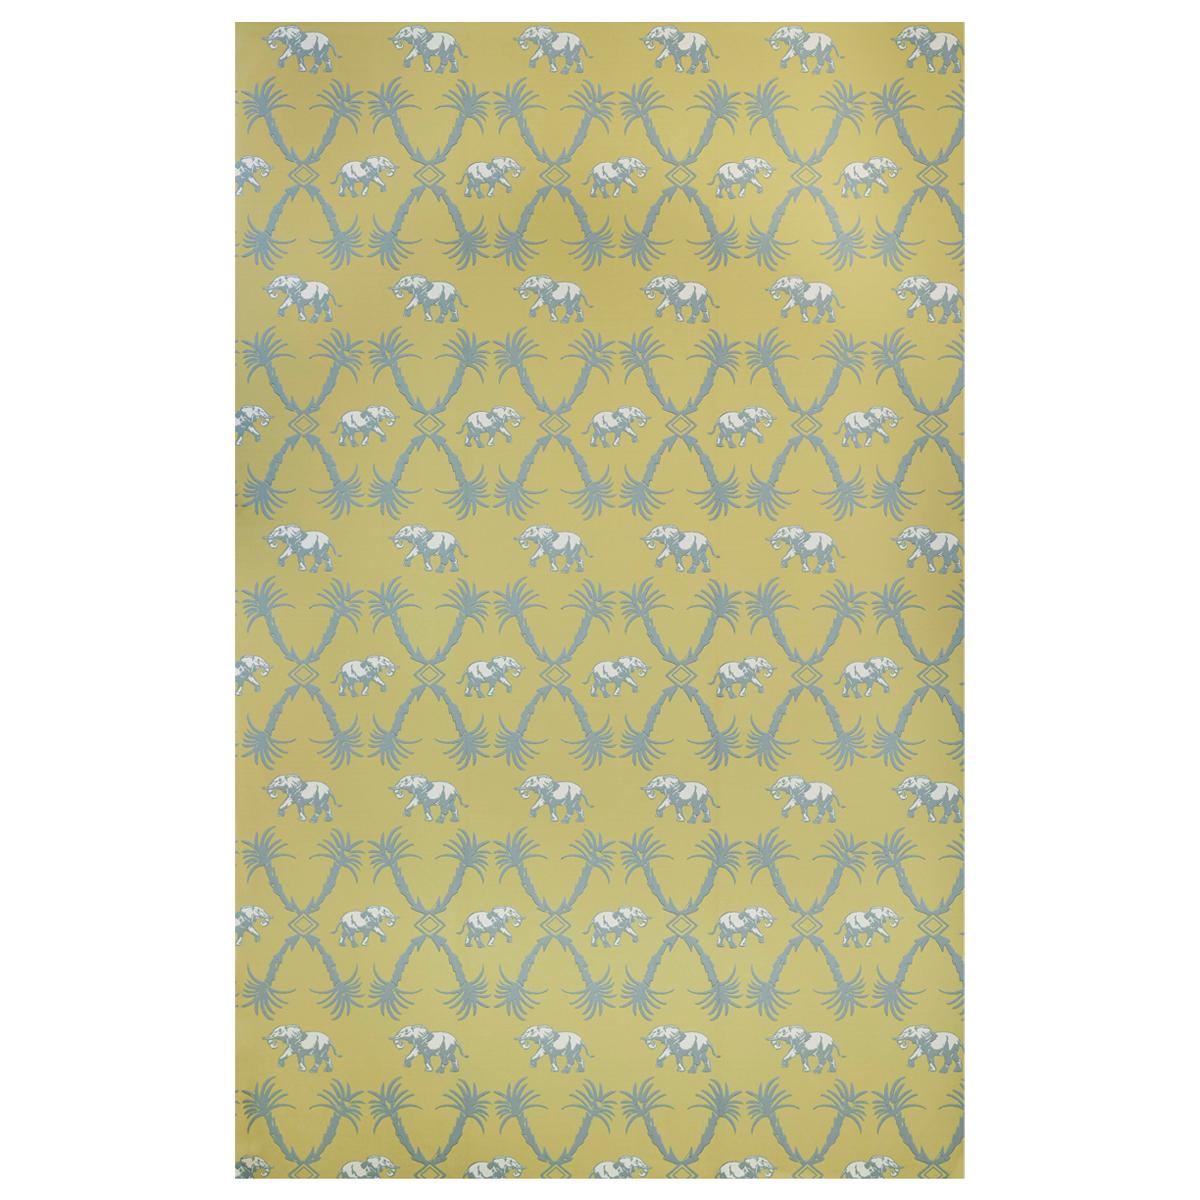 'Elephant Palm' Contemporary, Traditional Wallpaper in Ochre/Blue For Sale